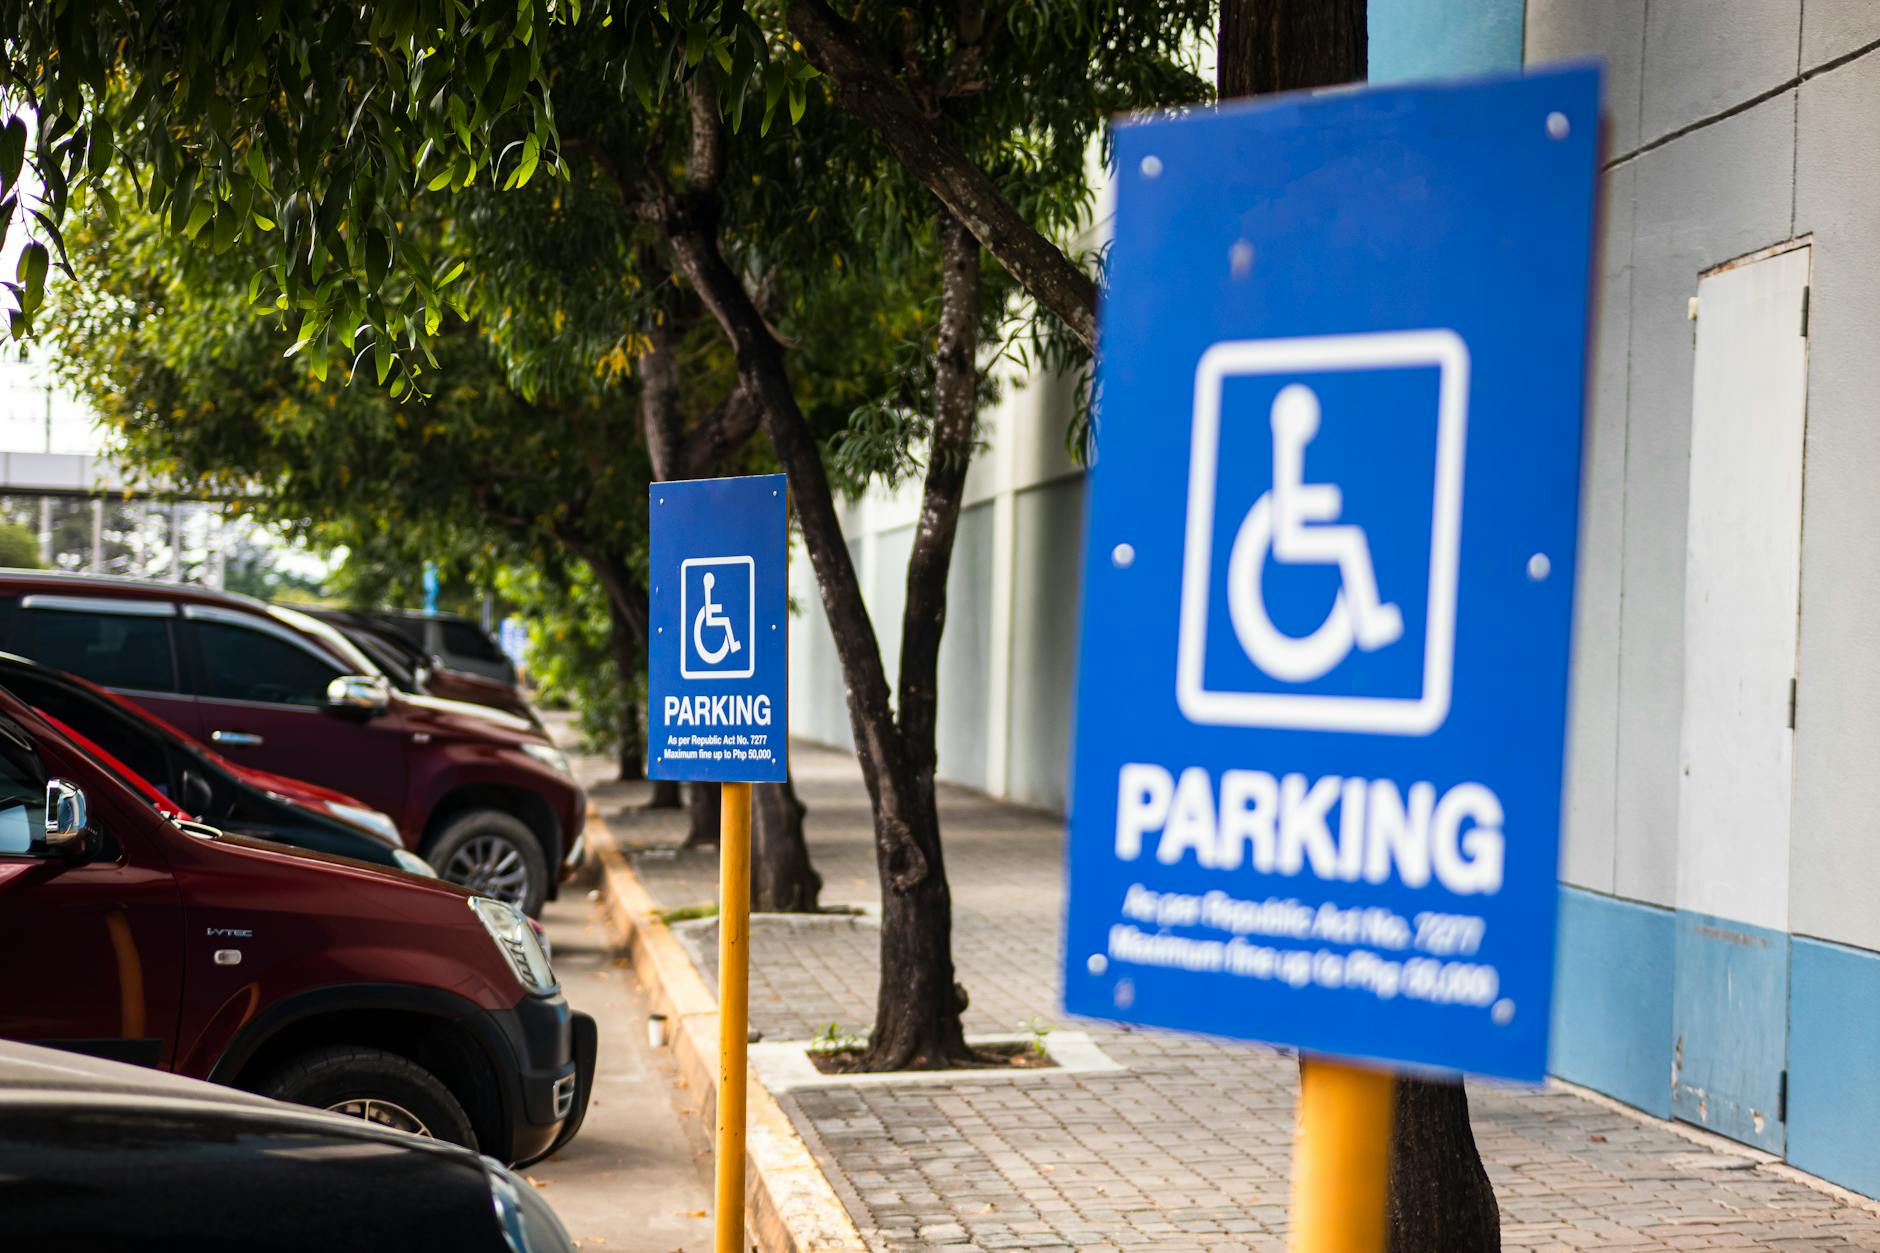 Disabled parking sign on street with transport